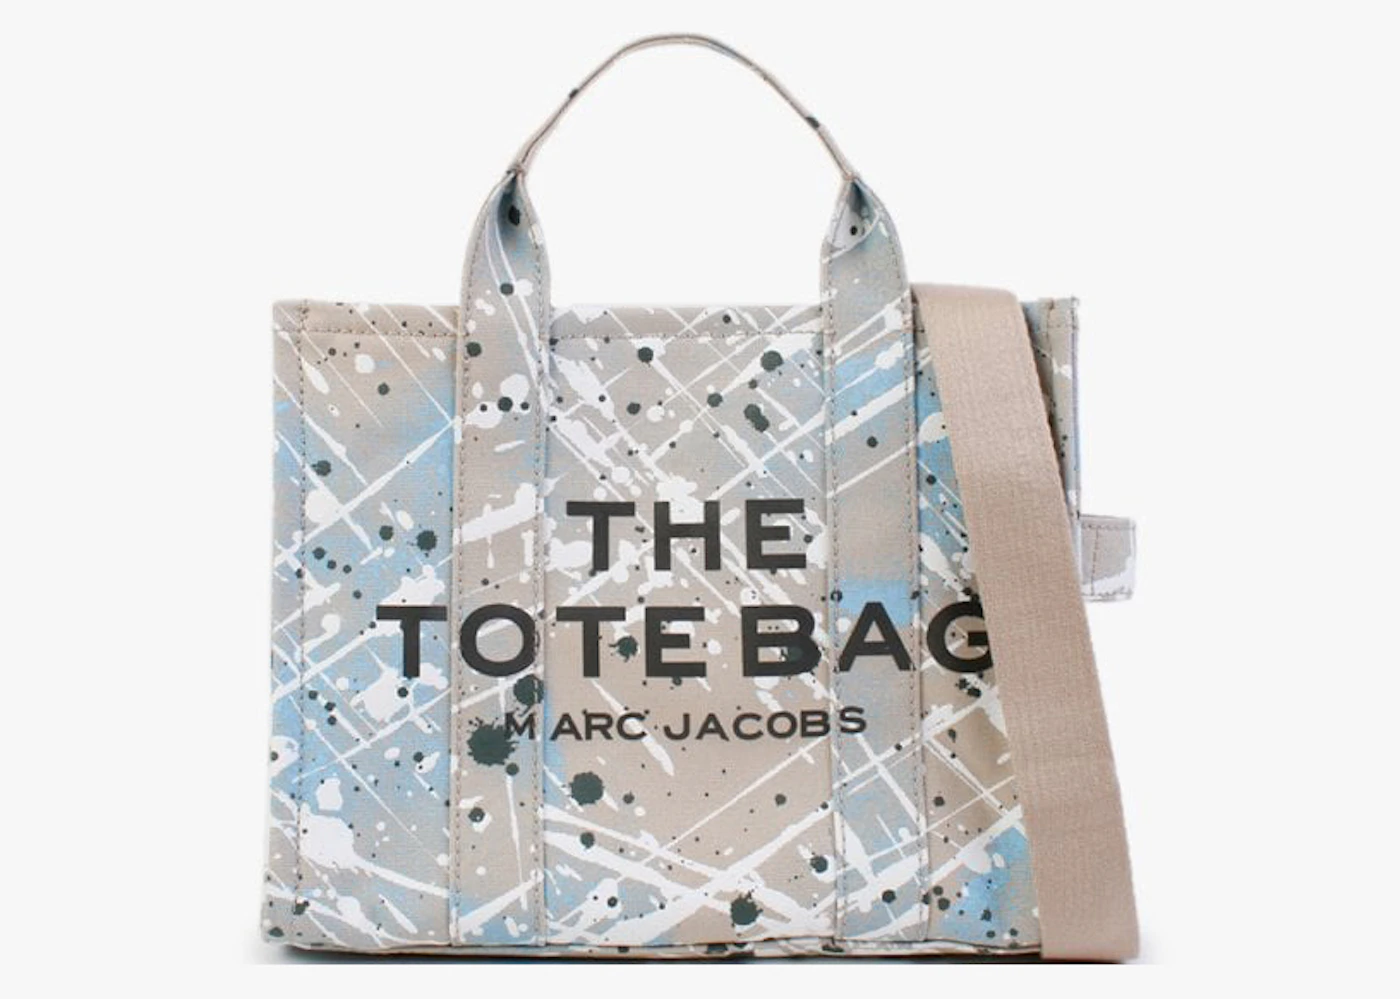 MARC JACOBS THE TOTE BAG SMALL